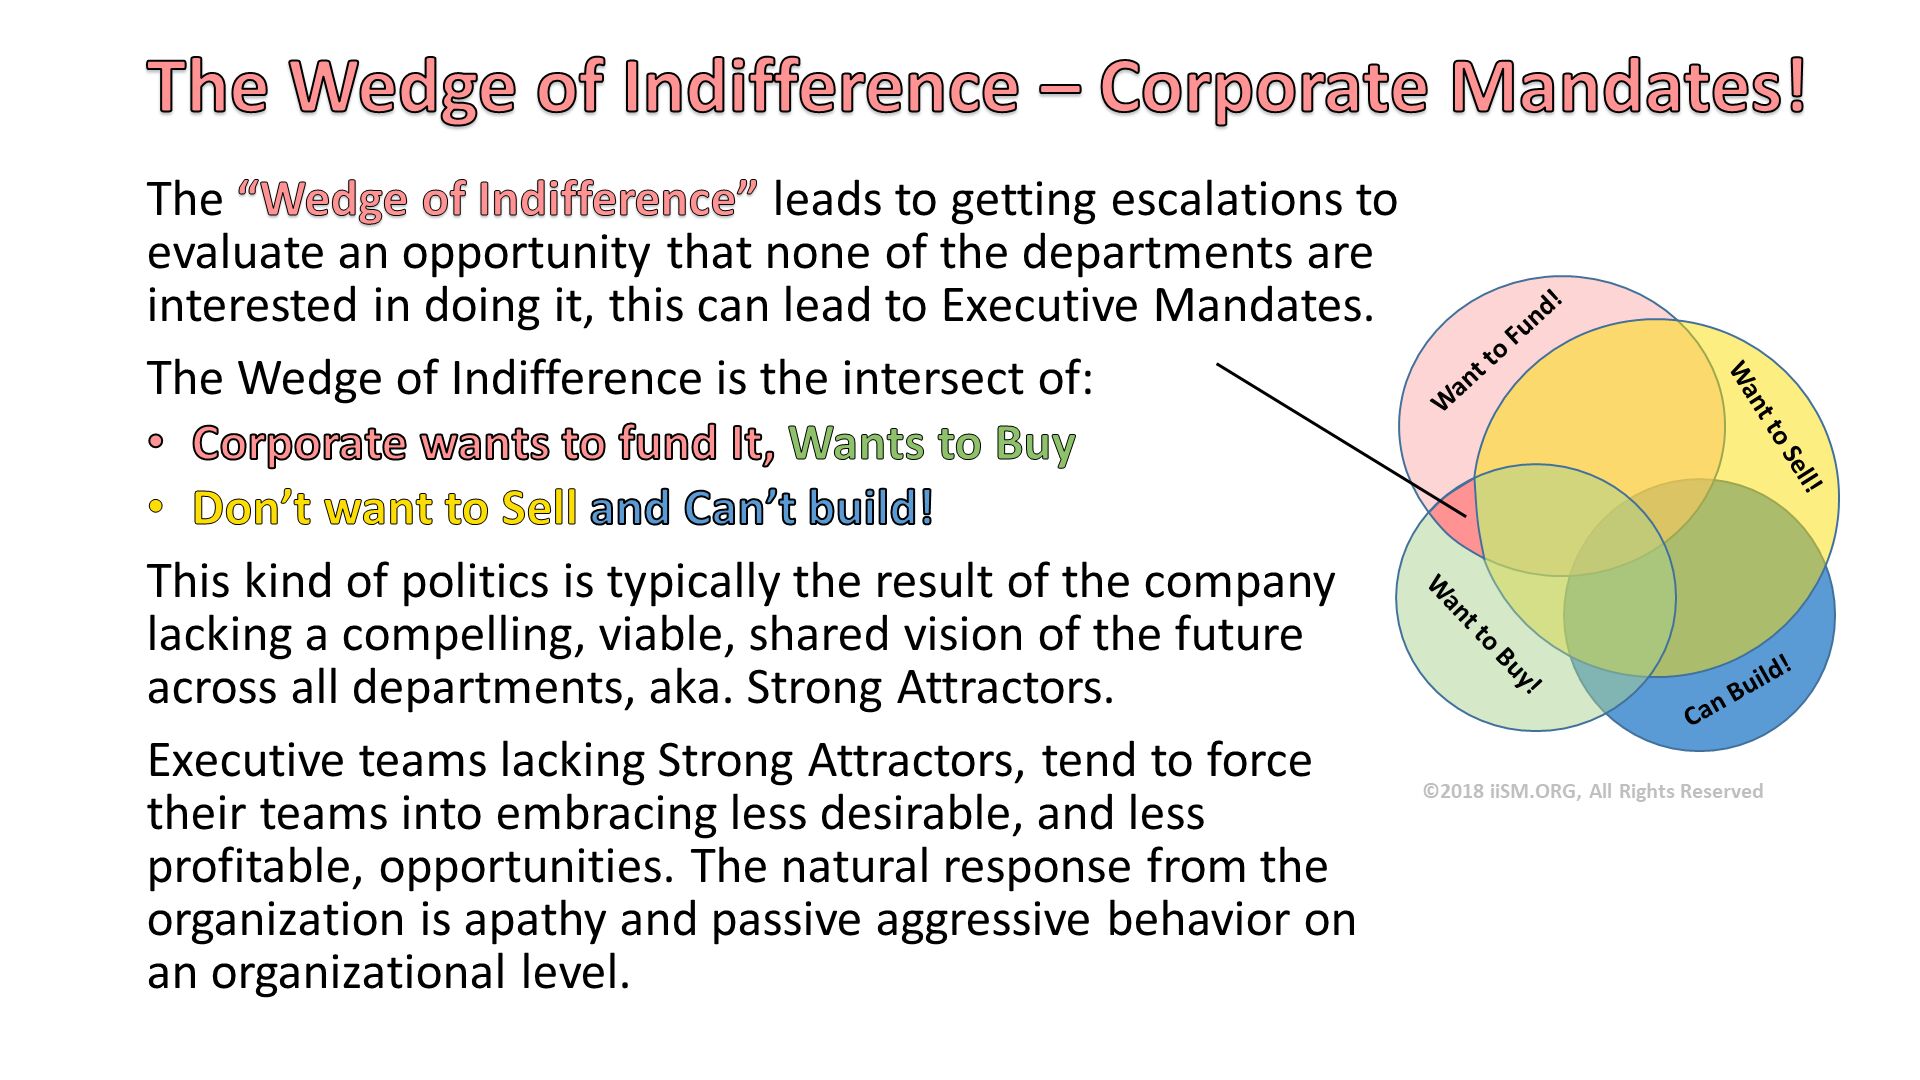 The Wedge of Indifference – Corporate Mandates!. The “Wedge of Indifference” leads to getting escalations to evaluate an opportunity that none of the departments are interested in doing it, this can lead to Executive Mandates.
The Wedge of Indifference is the intersect of:
Corporate wants to fund It, Wants to Buy
Don’t want to Sell and Can’t build!
This kind of politics is typically the result of the company lacking a compelling, viable, shared vision of the future across all departments, aka. Strong Attractors.  
Executive teams lacking Strong Attractors, tend to force their teams into embracing less desirable, and less profitable, opportunities. The natural response from the organization is apathy and passive aggressive behavior on an organizational level.  . 